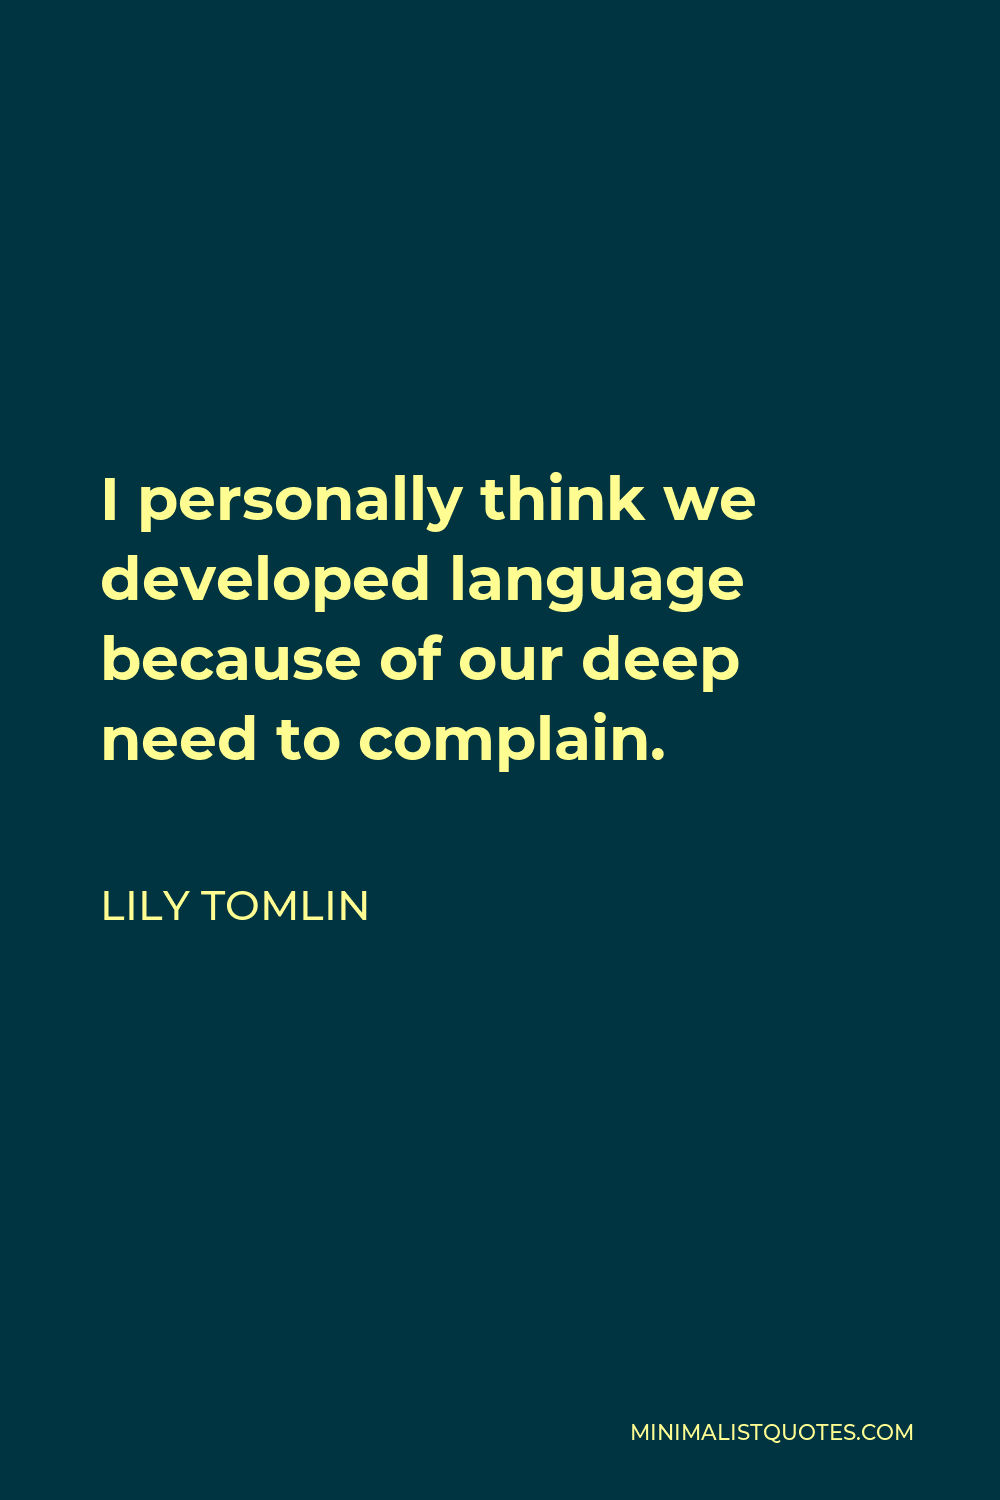 Lily Tomlin Quote - I personally think we developed language because of our deep need to complain.